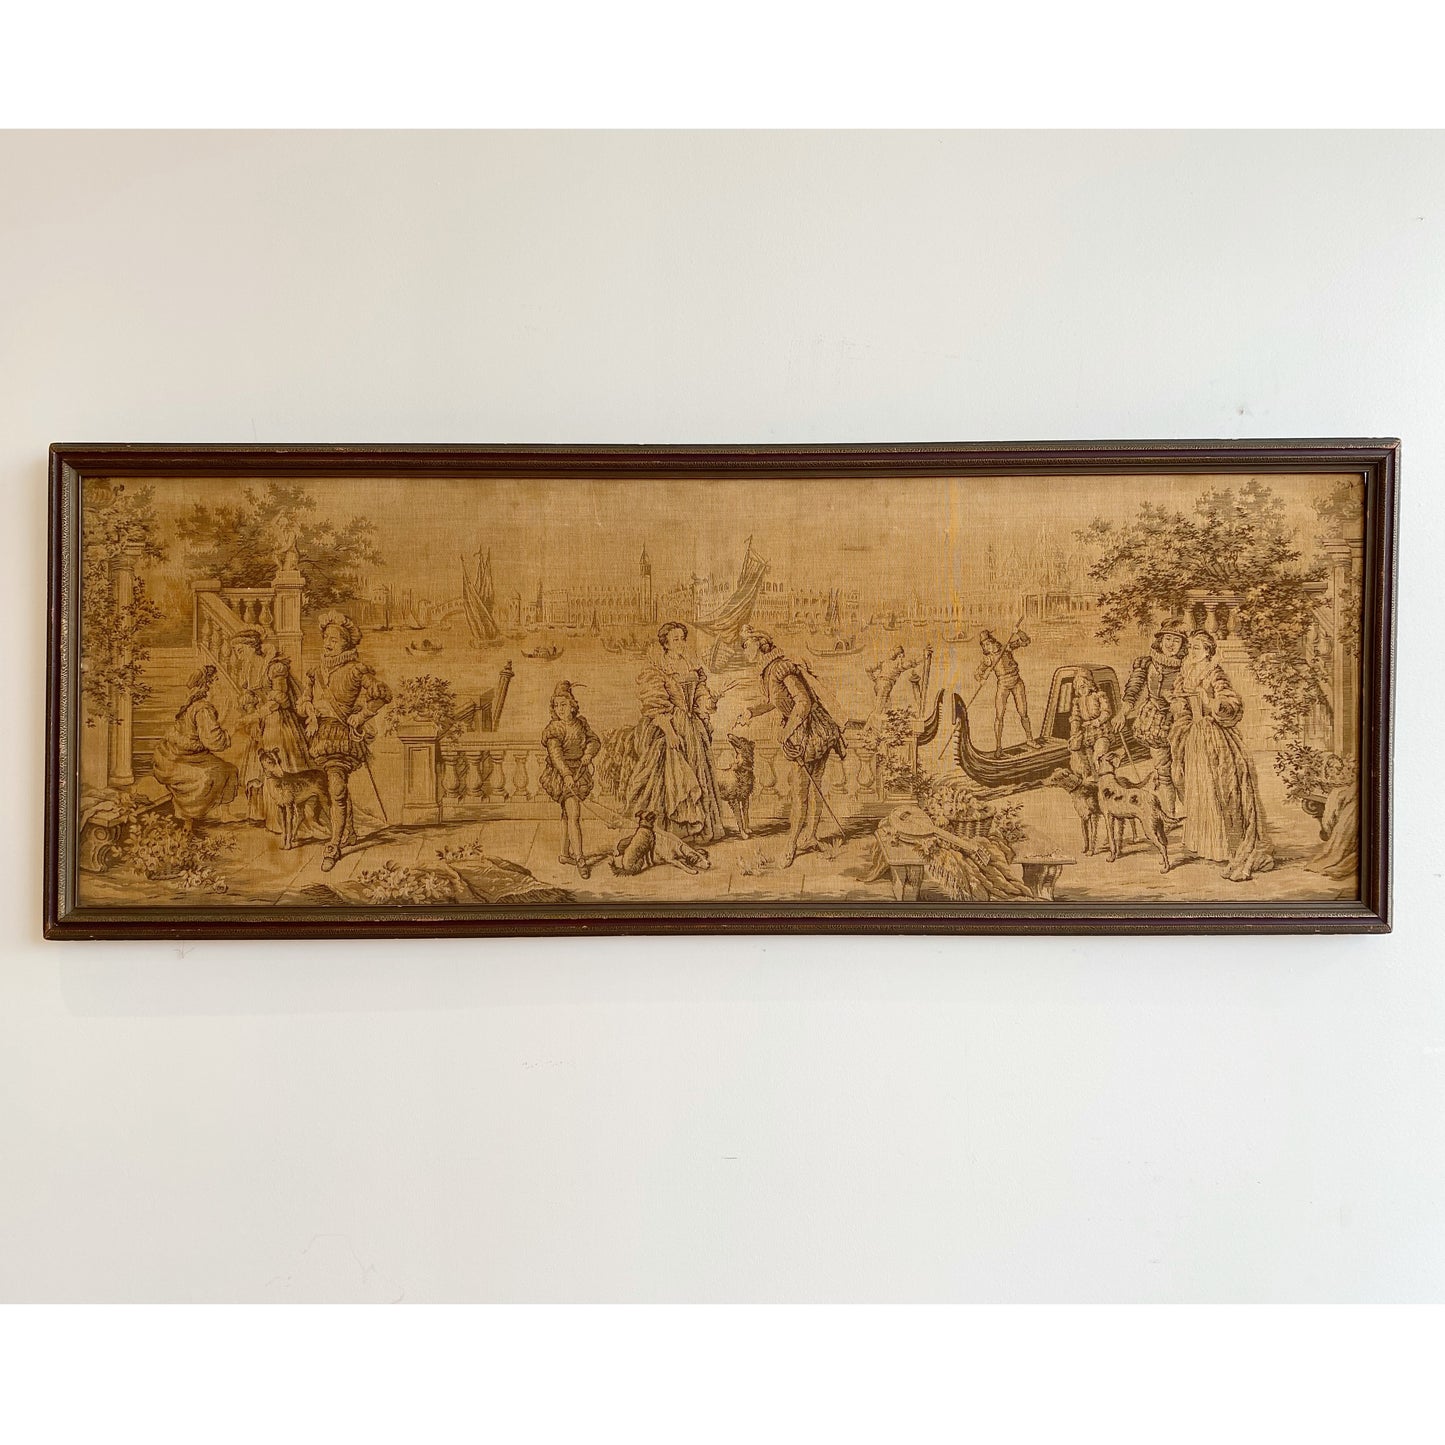 Framed Antique French Tapestry (21.5" x 10")